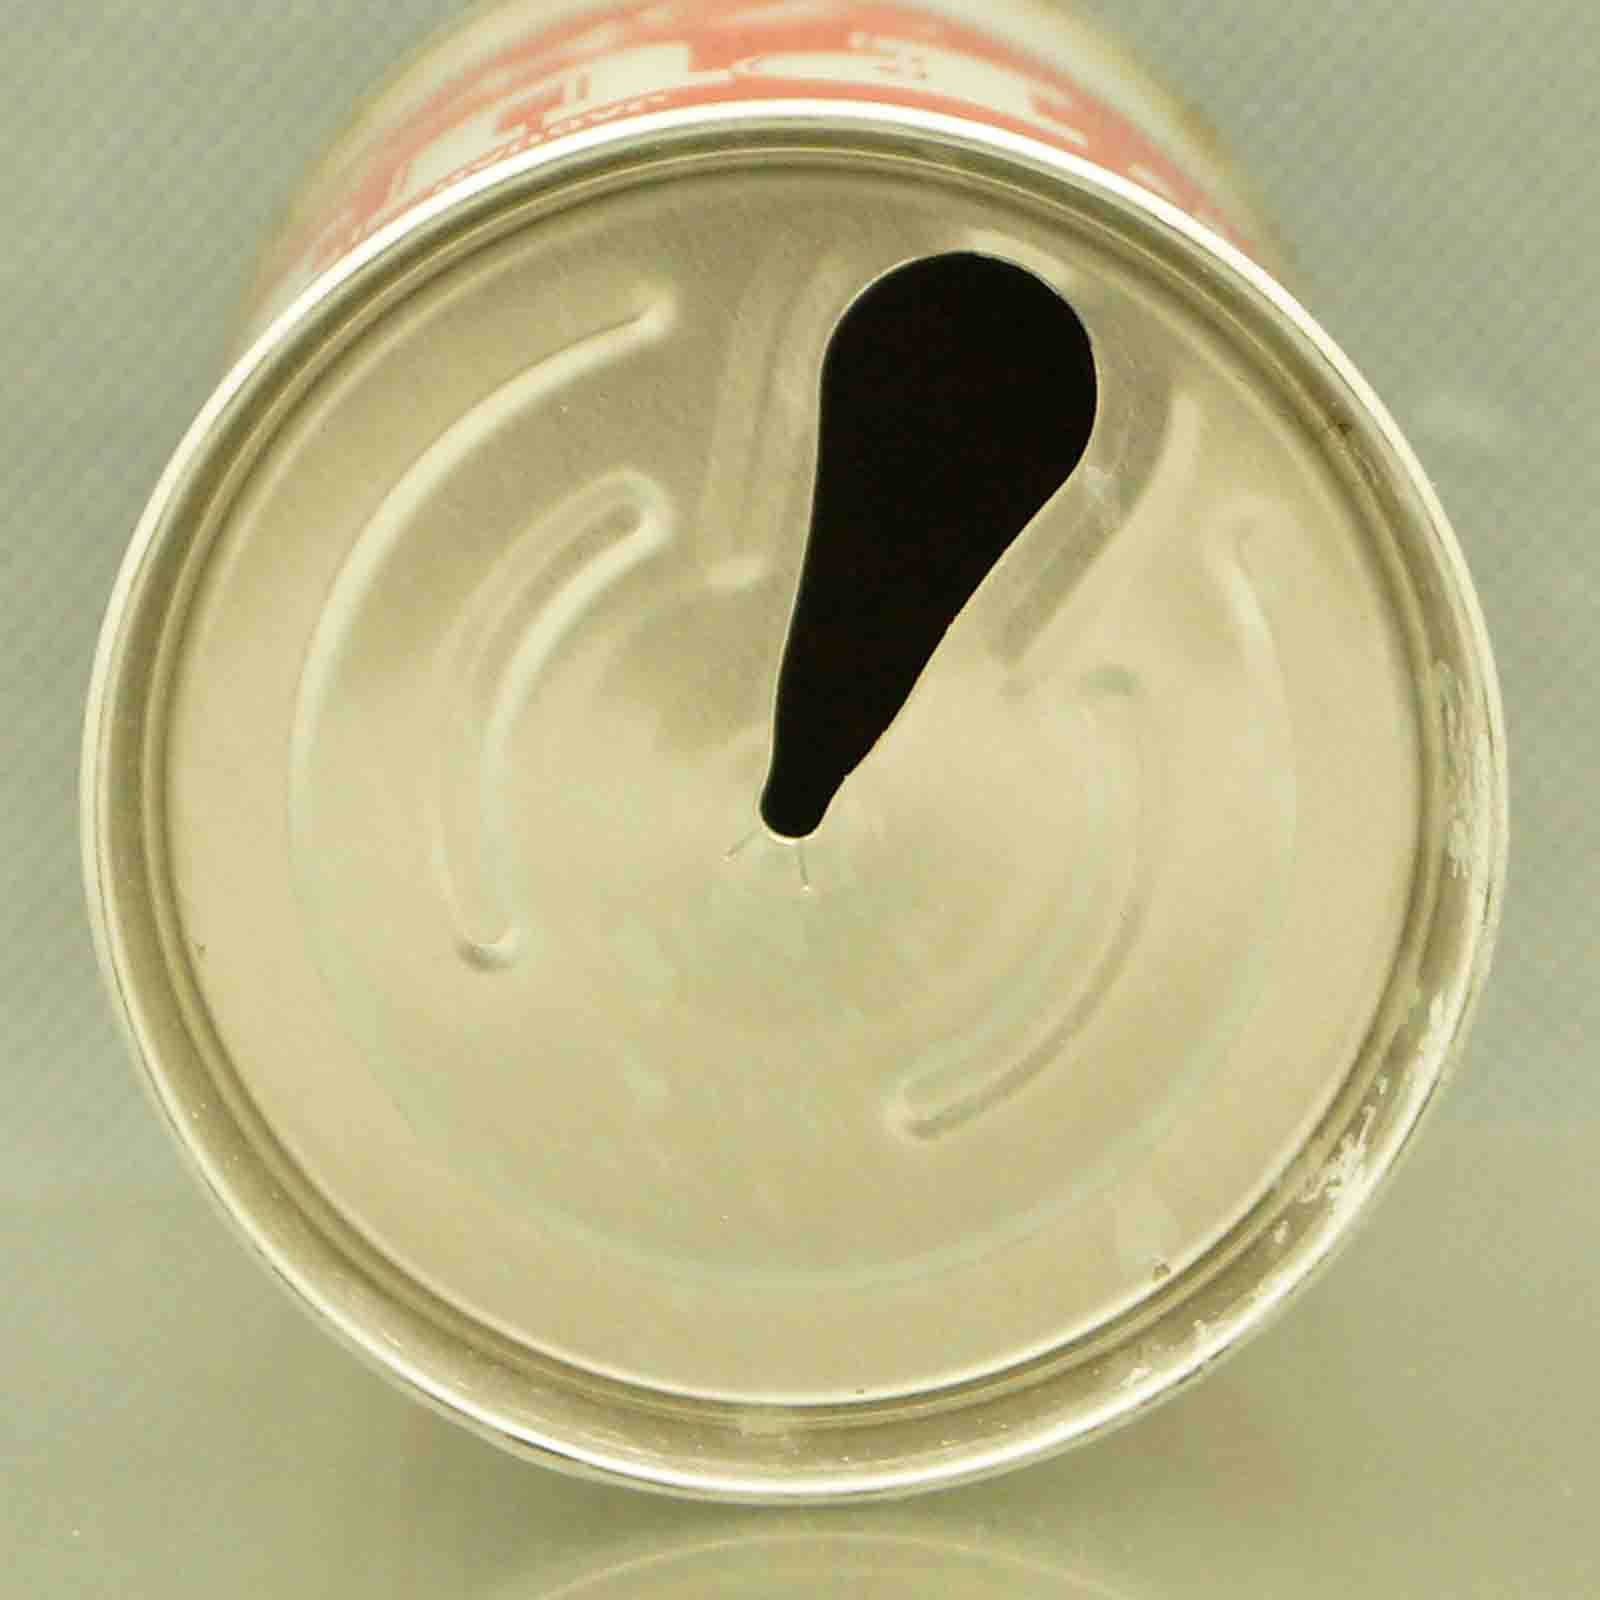 pub 82-35 pull tab beer can 5